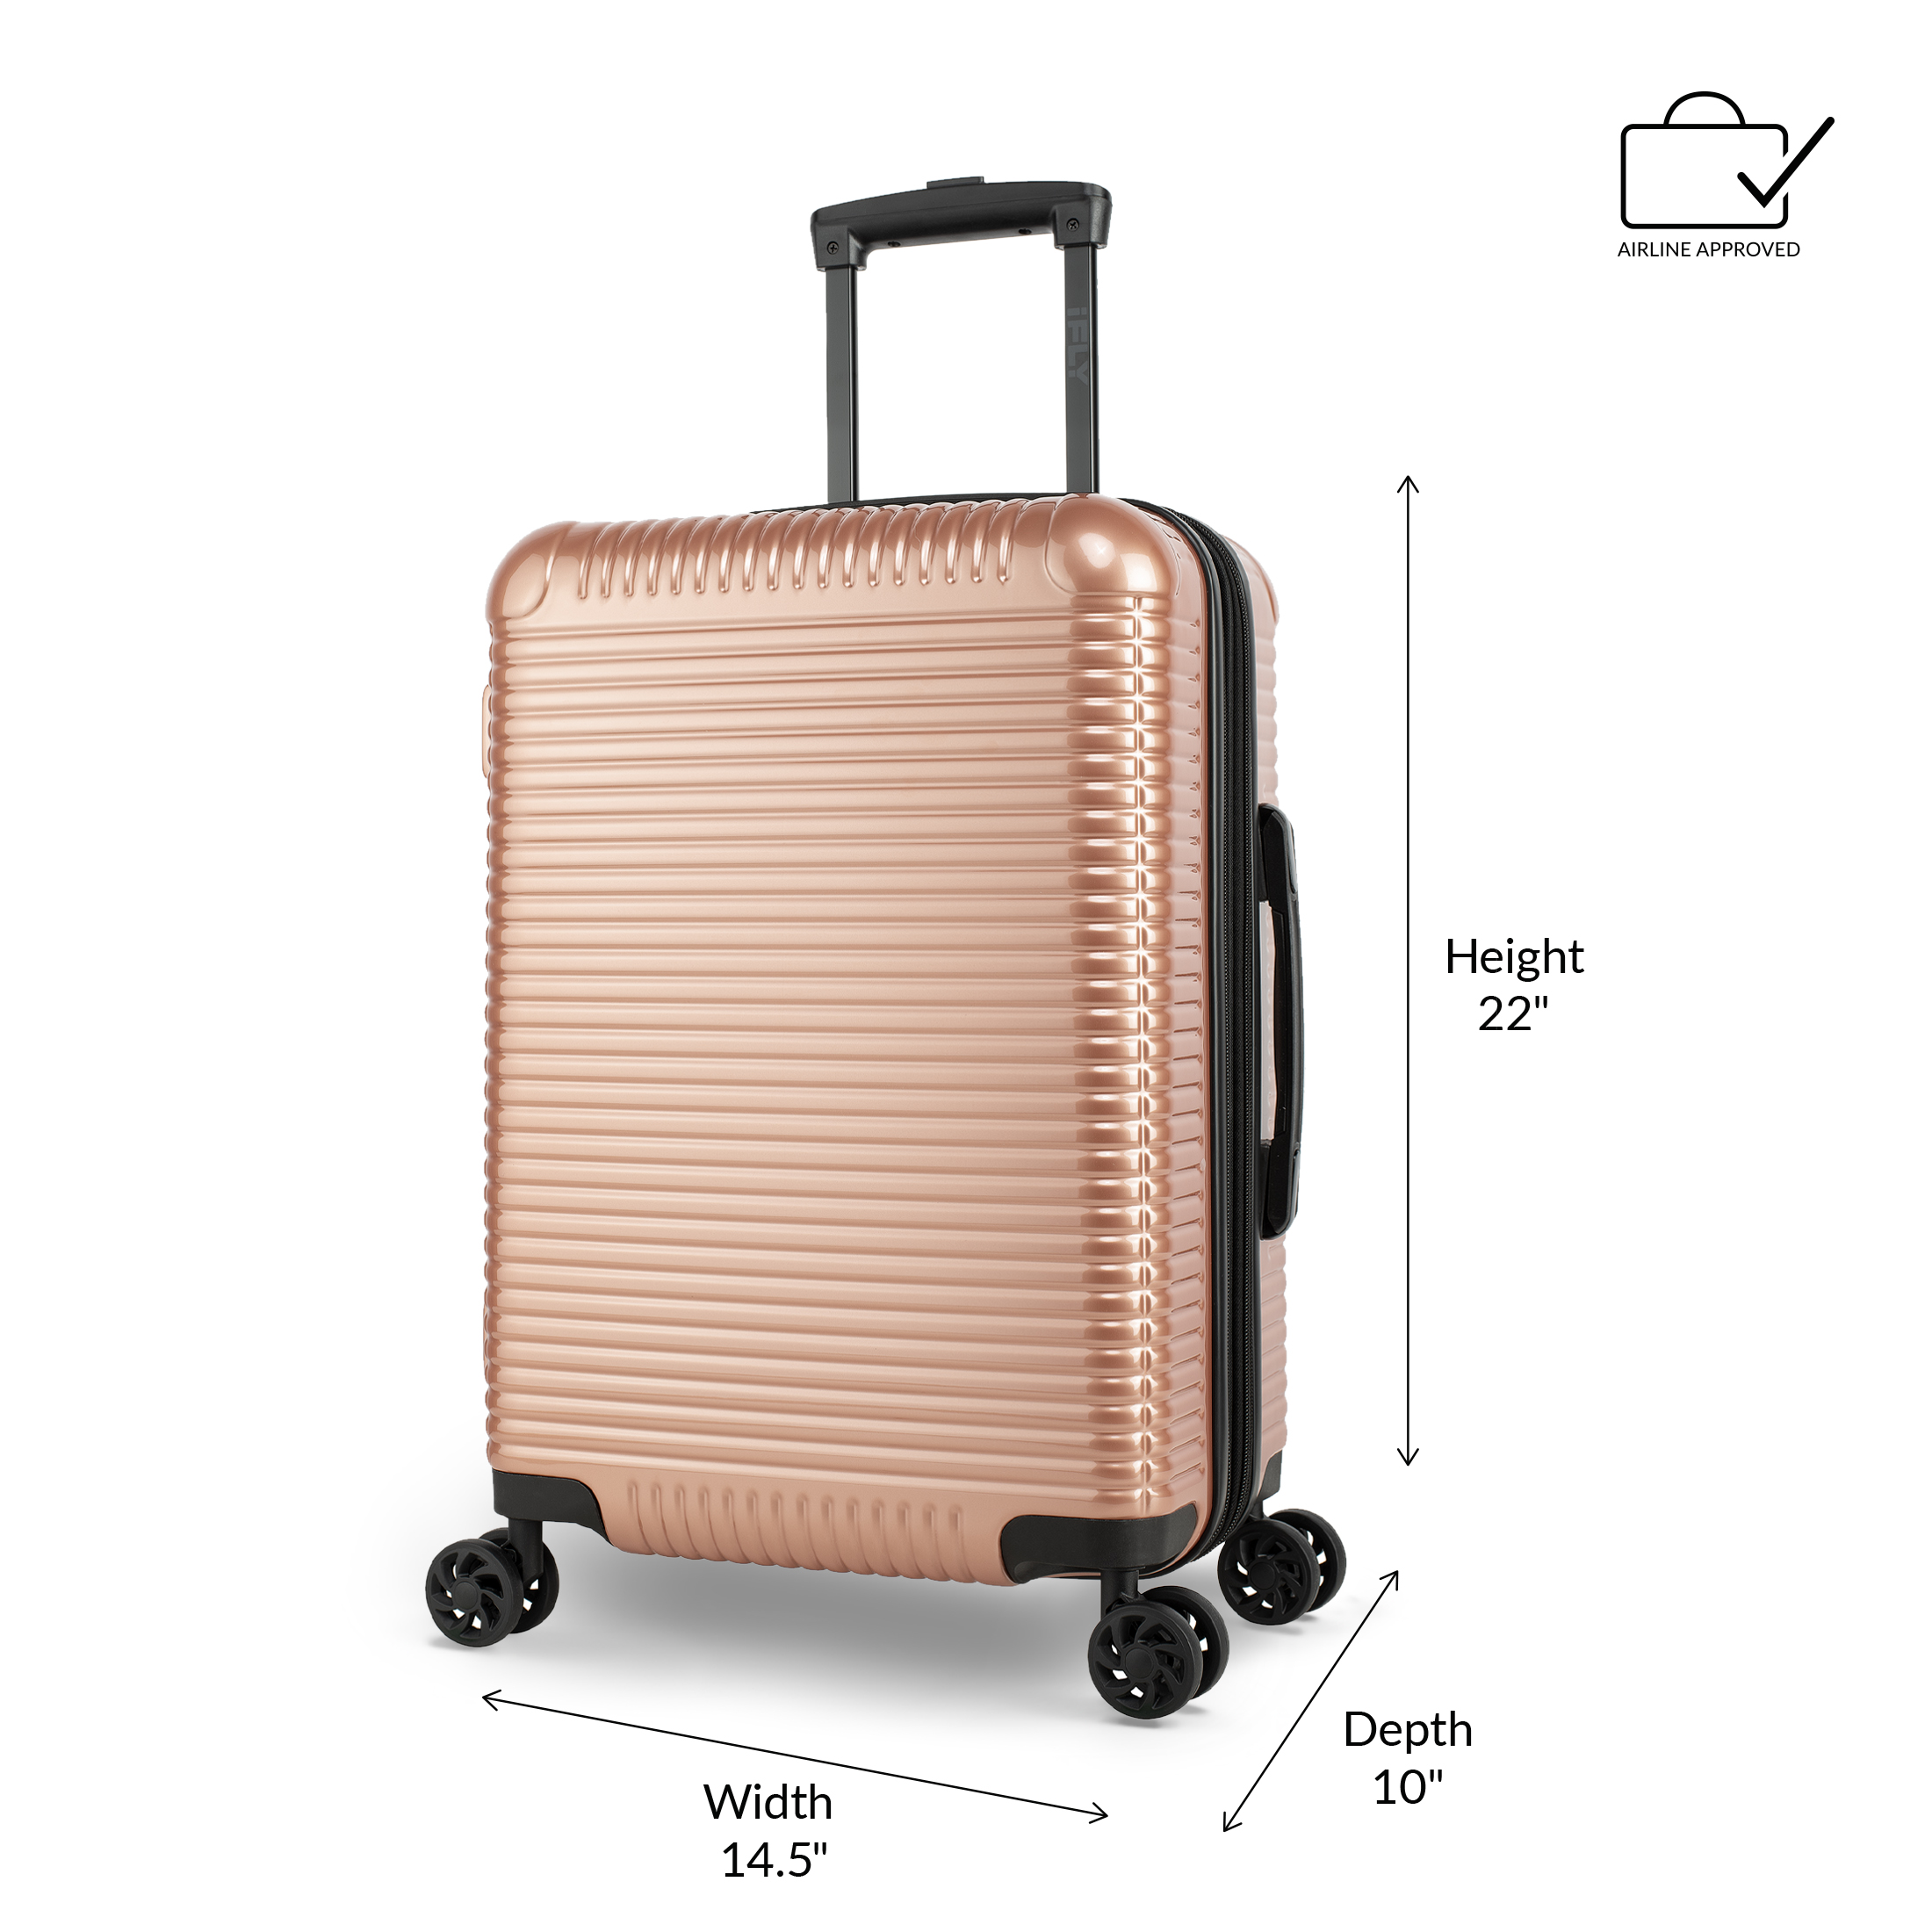 iFLY Hardside Alloy 20 Inch Carry-on, Copper - image 2 of 9